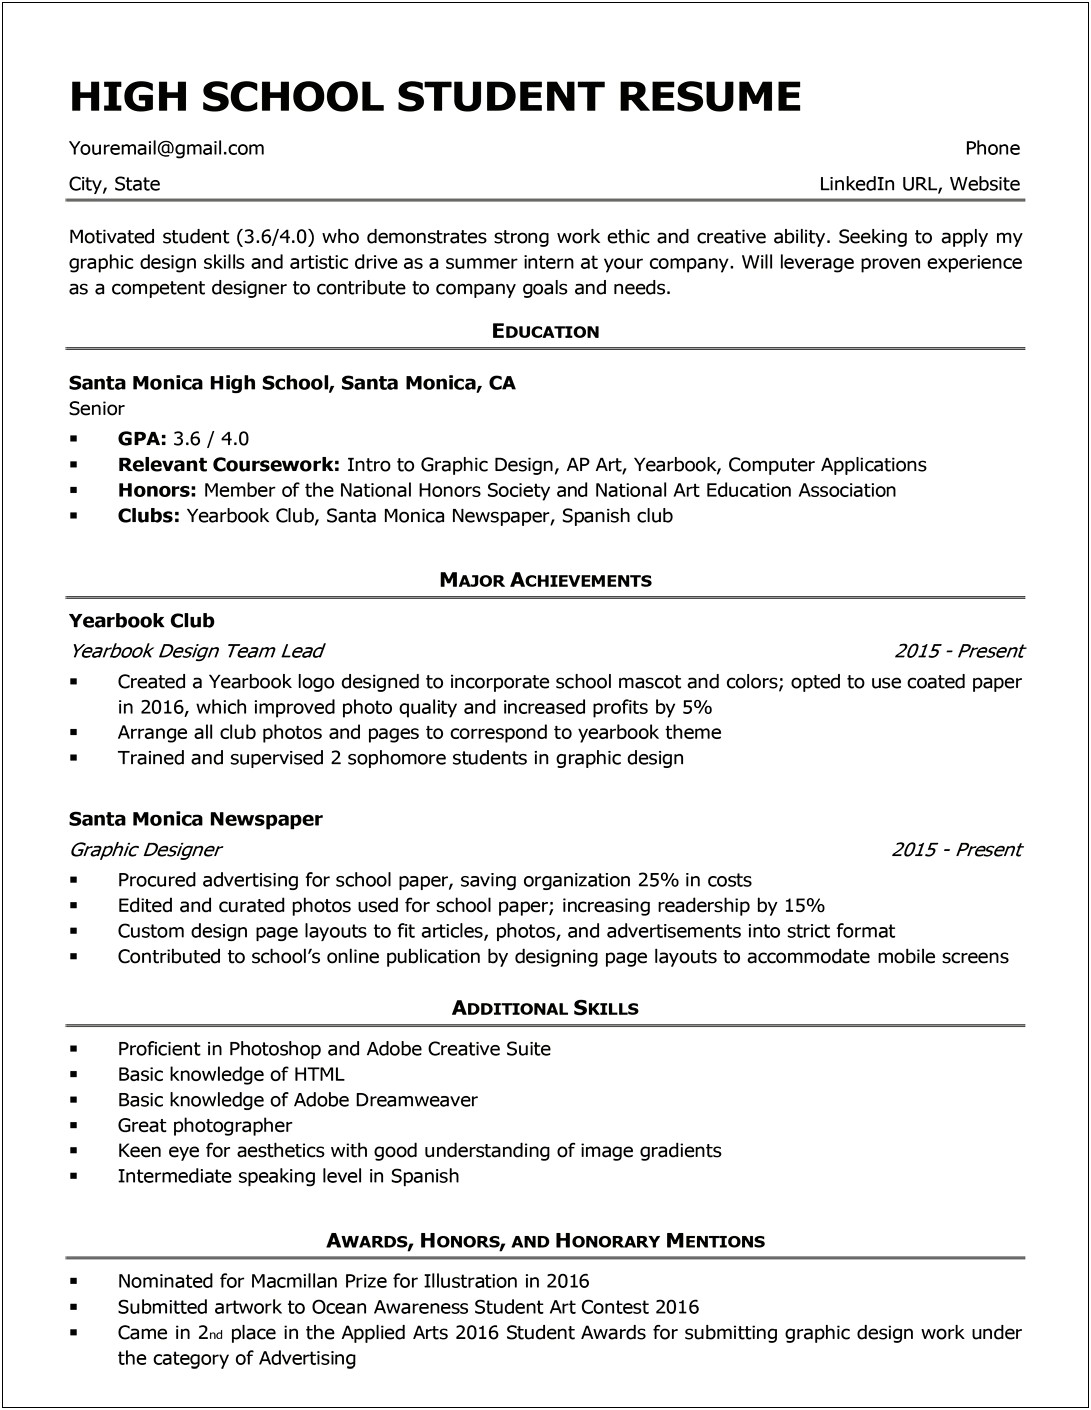 High School Student Resume 1 Page